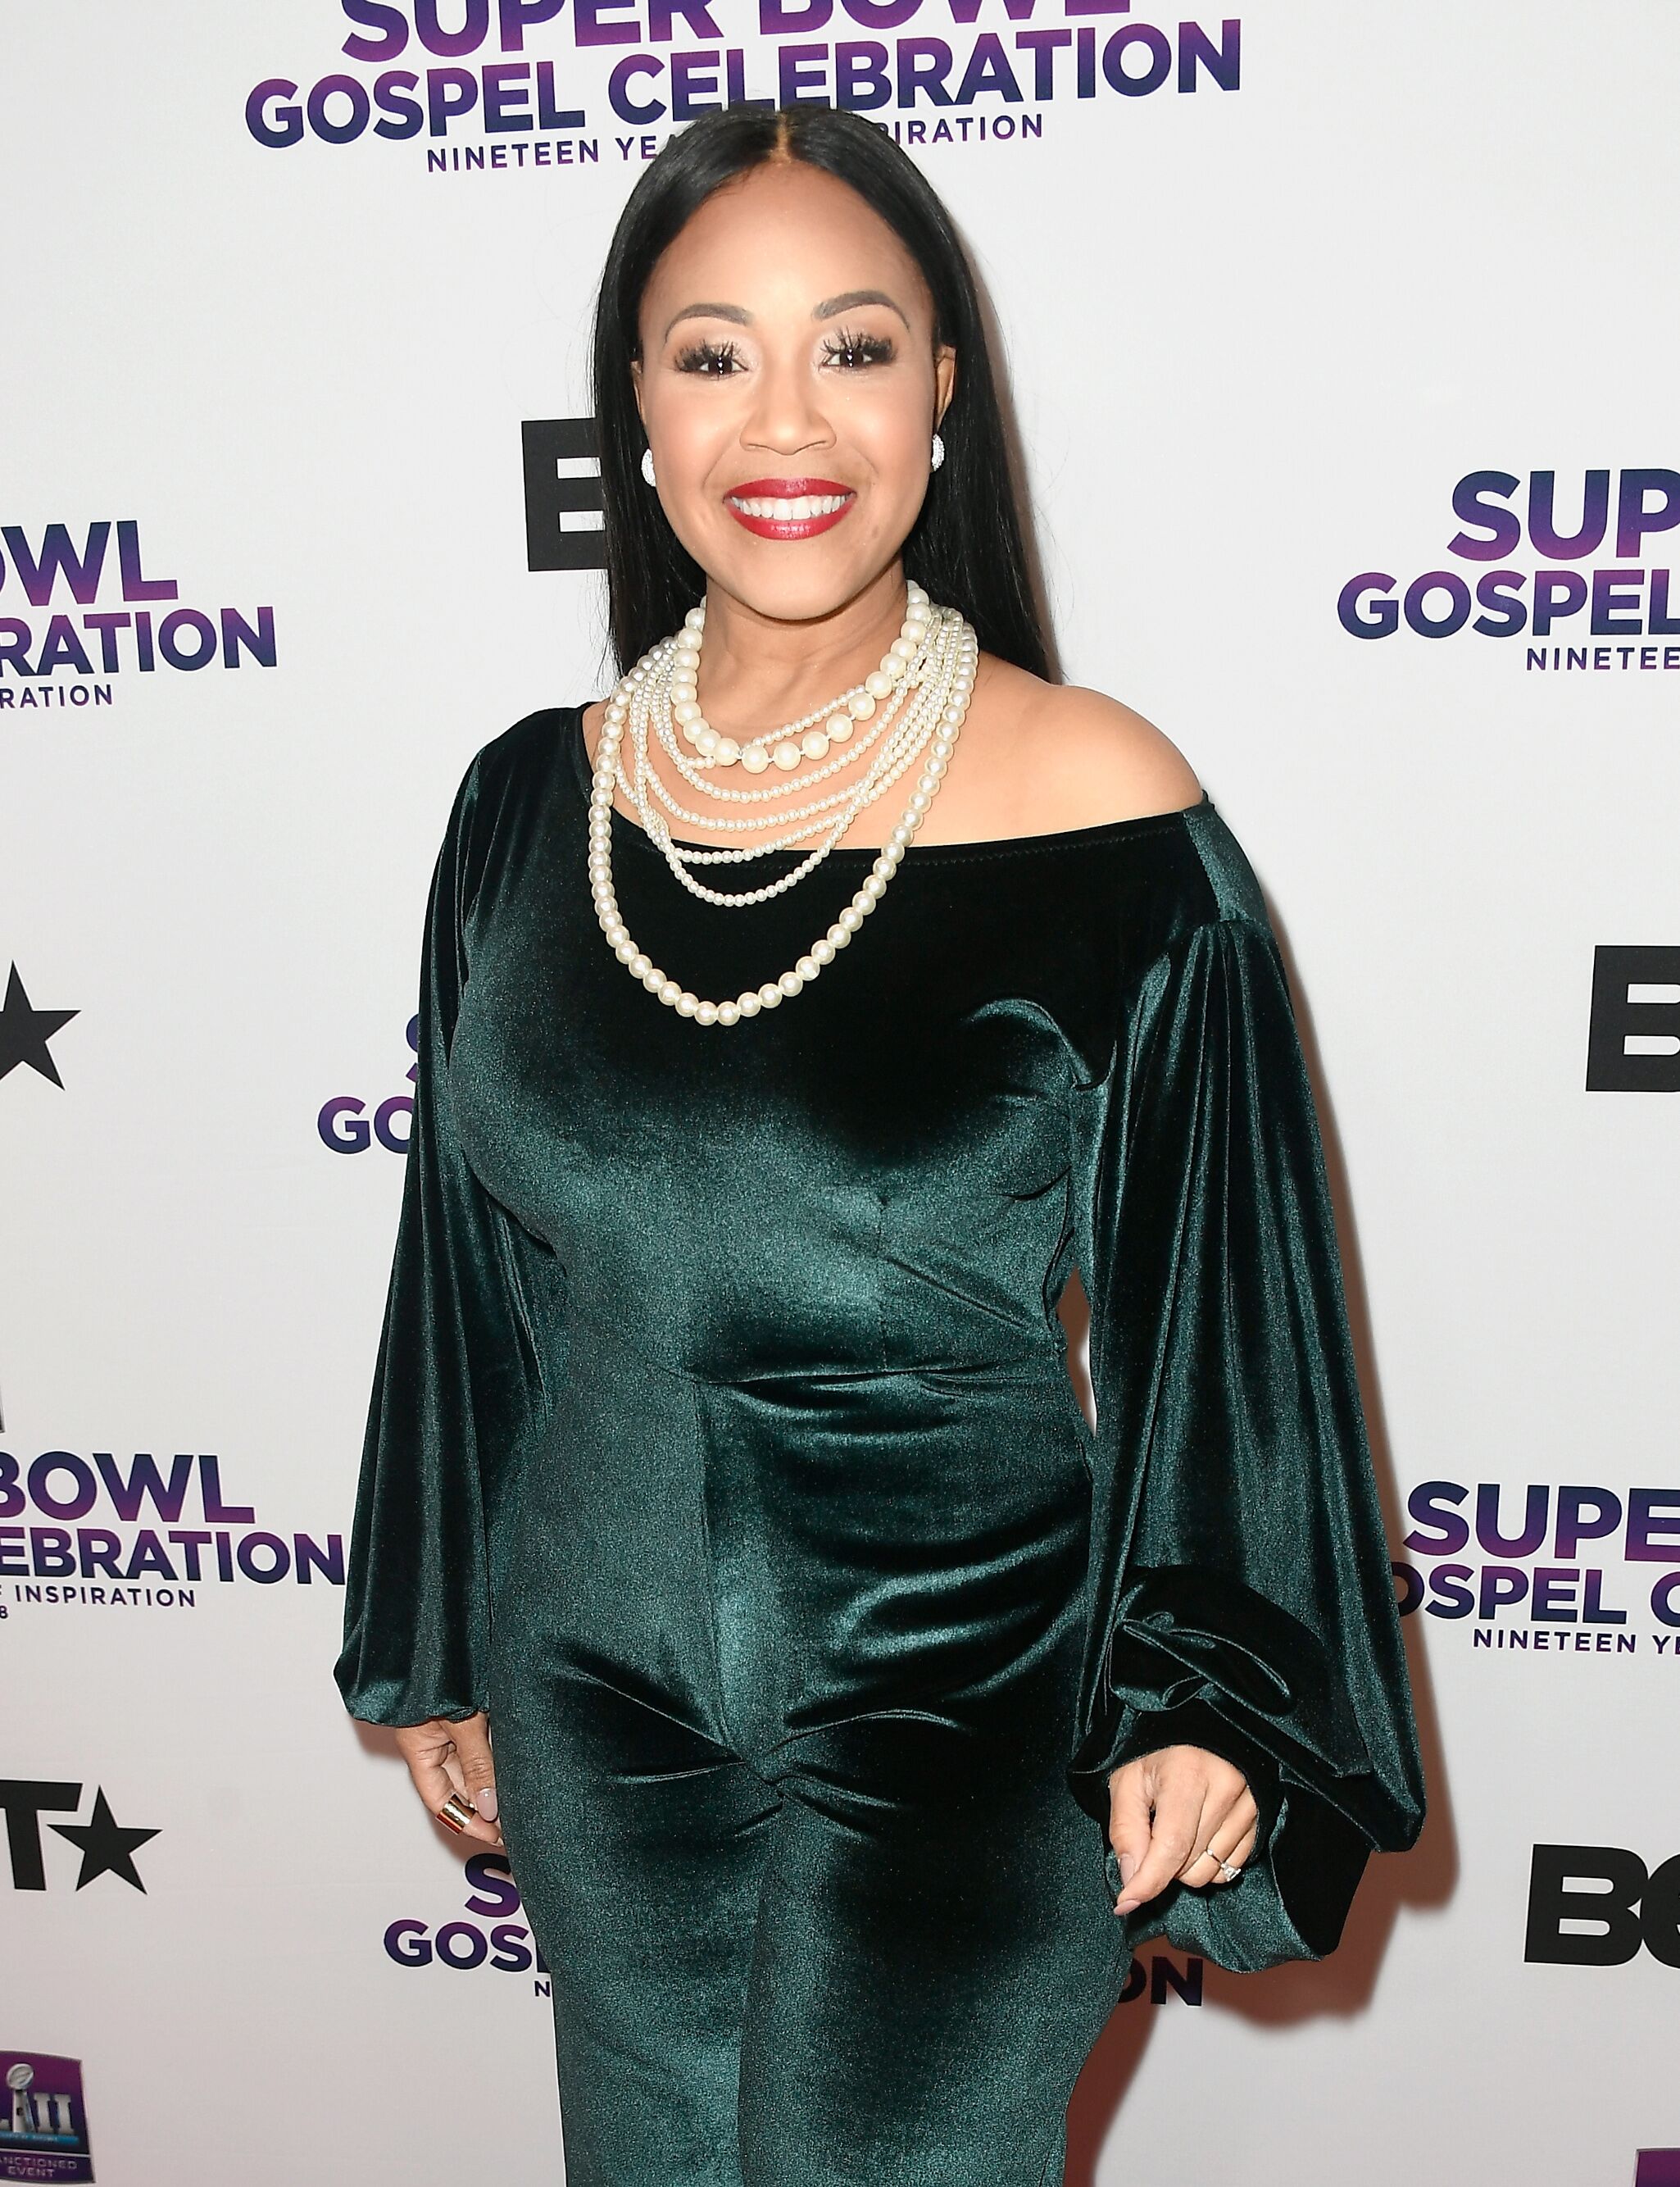 Erica Campbell at BET Presents 19th Annual Super Bowl Gospel Celebration at Bethel University on February 1, 2018 | Photo: Getty Images